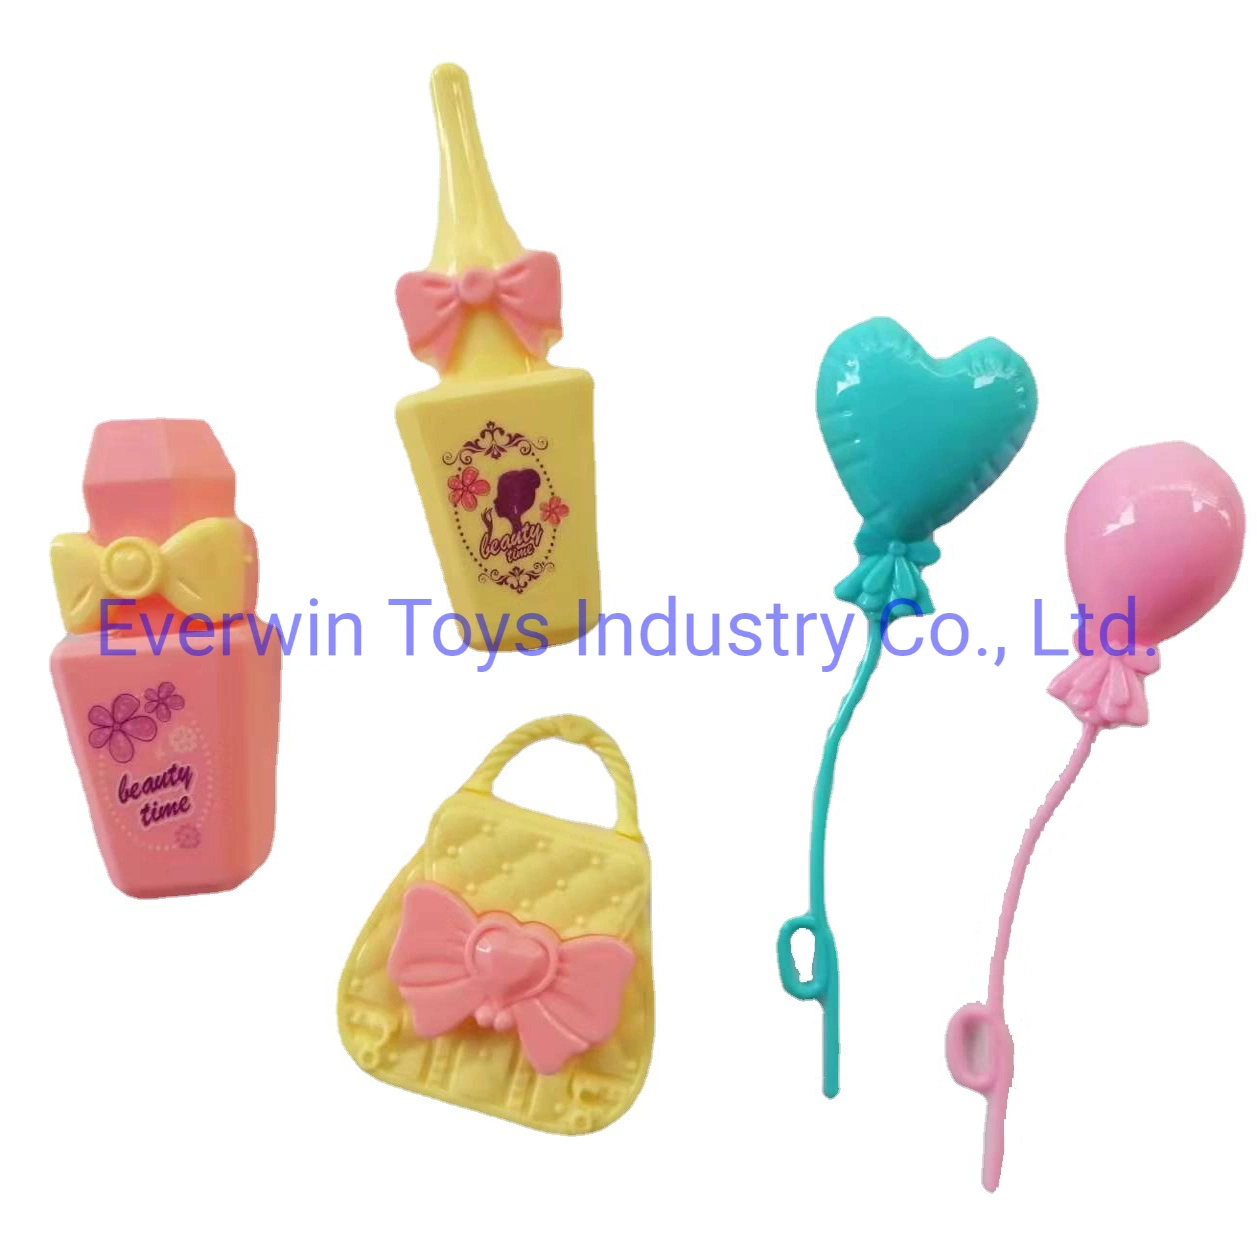 Plastic Toys Set Balloon Gifts Lipstick Perfume Toy for Barbie Dolls